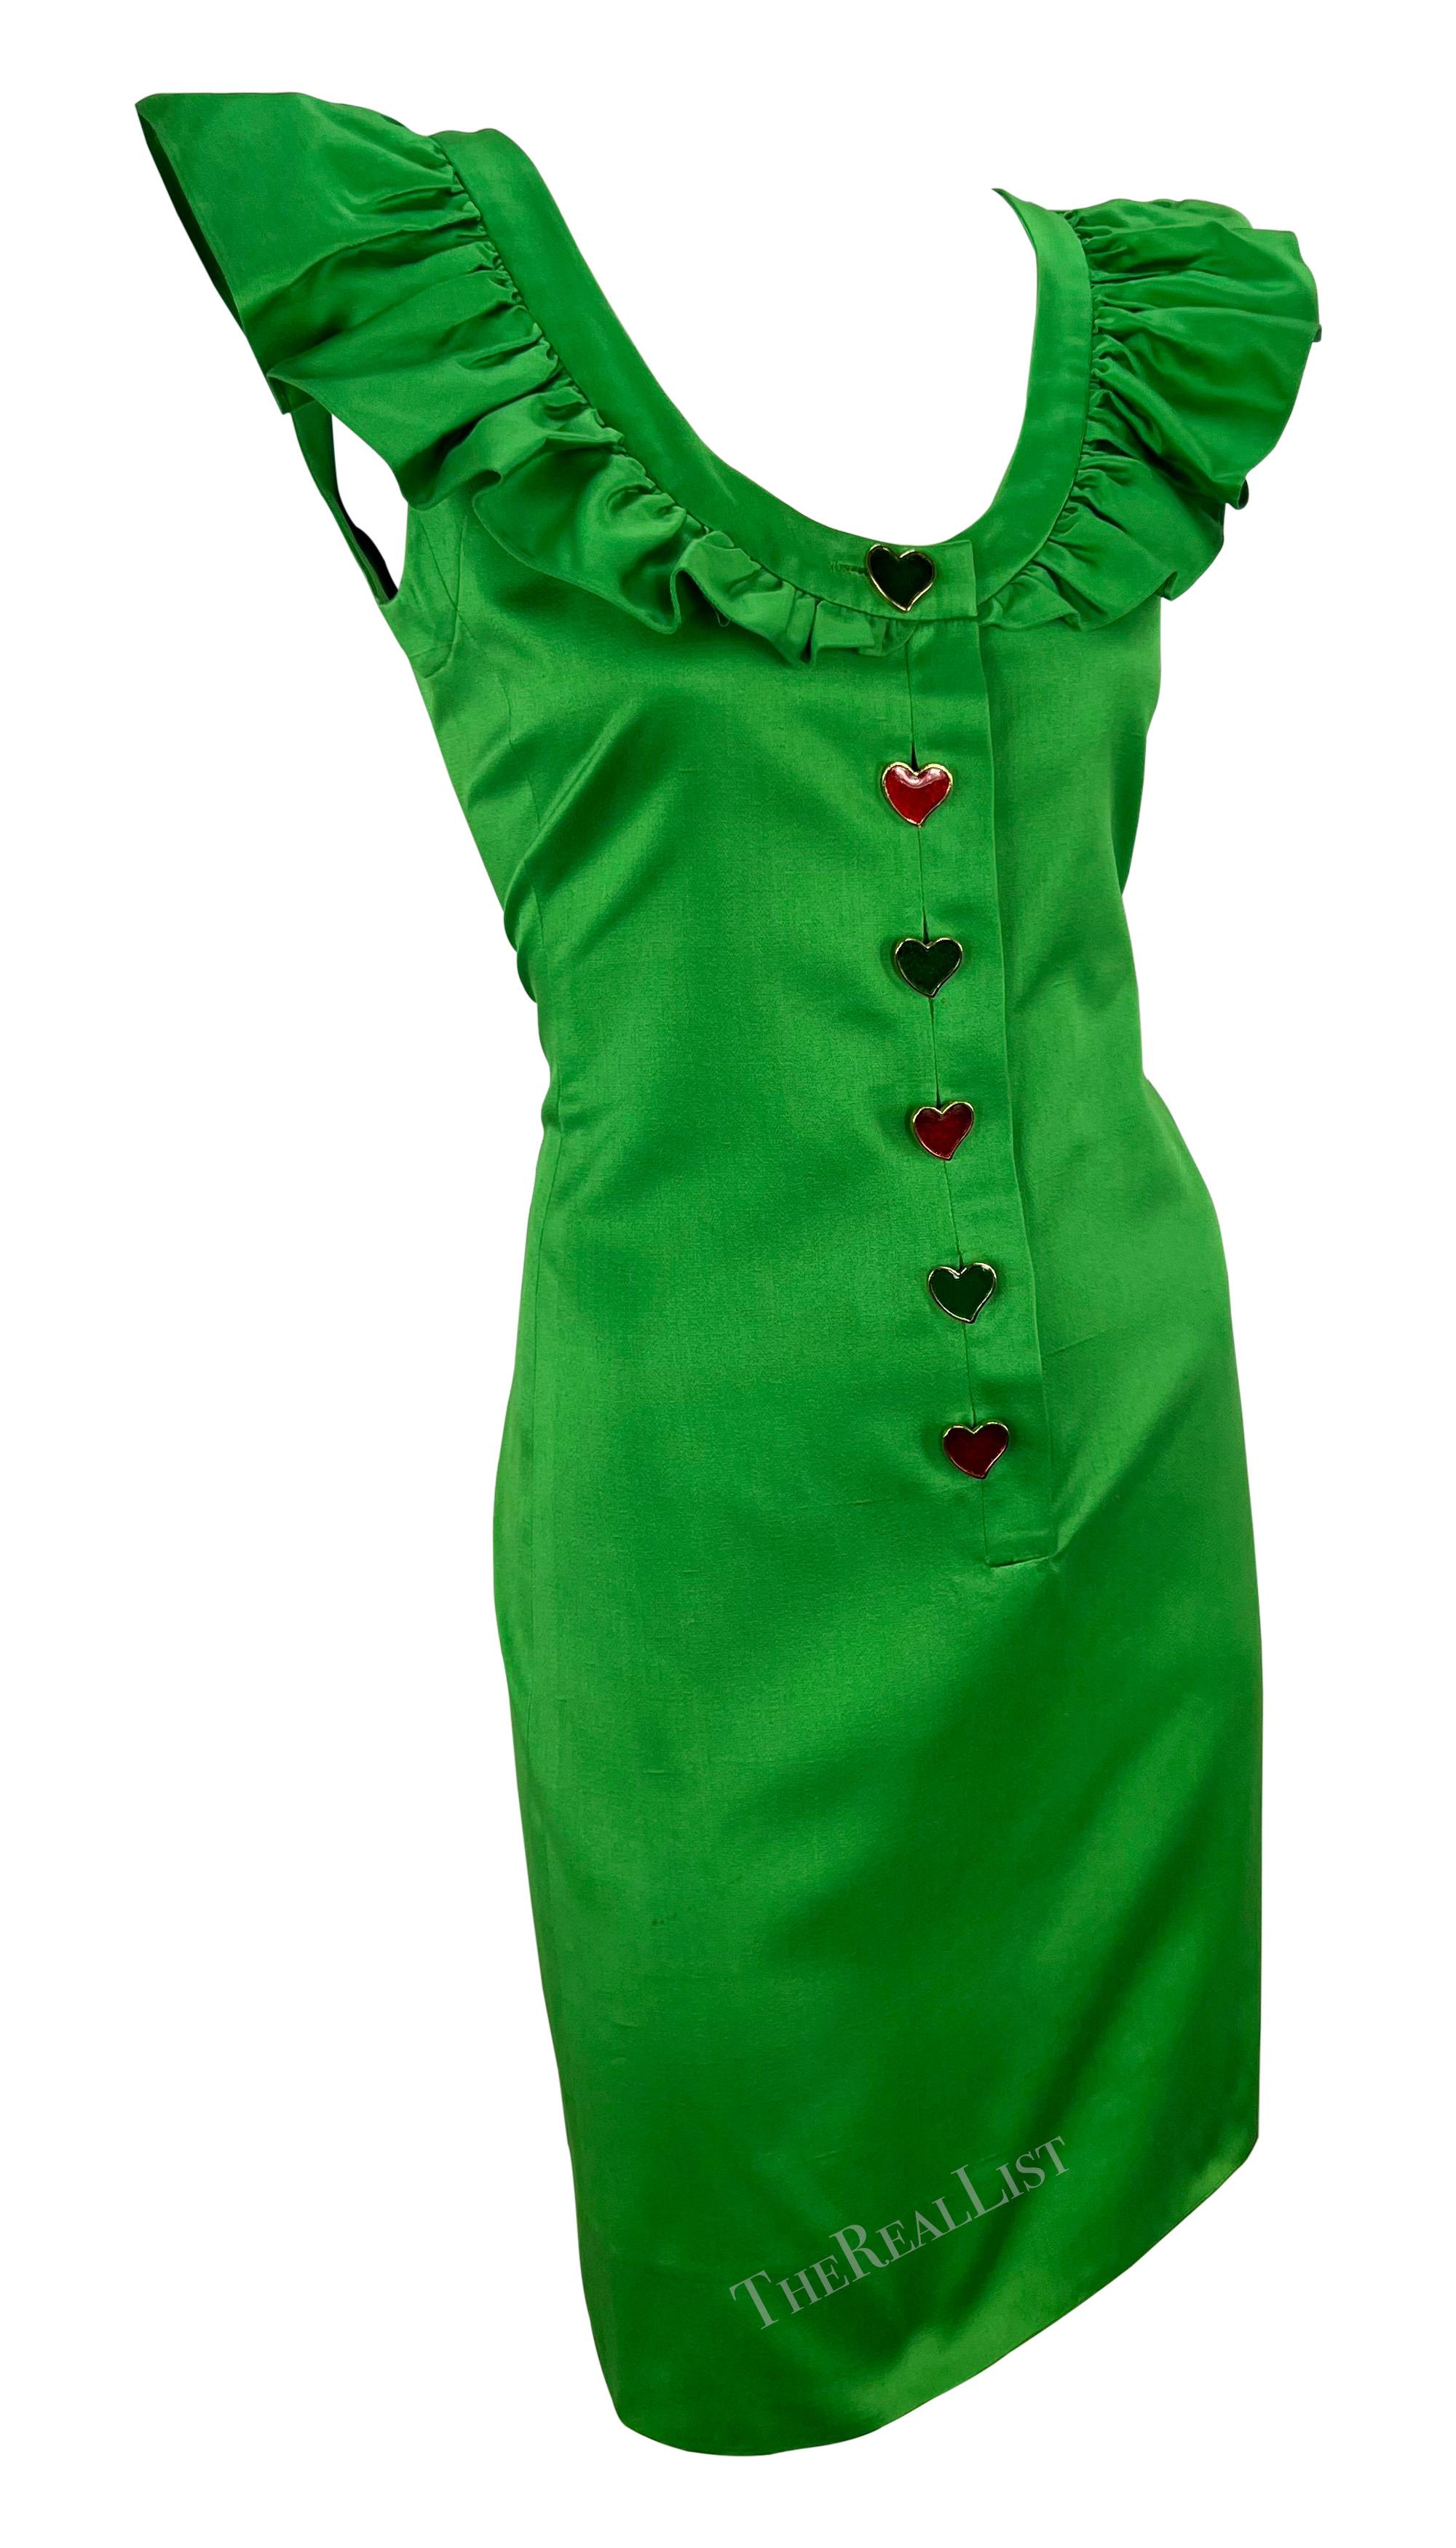 S/S 1992 Yves Saint Laurent Runway Ad Bright Green Ruffle Heart Button Dress For Sale 6